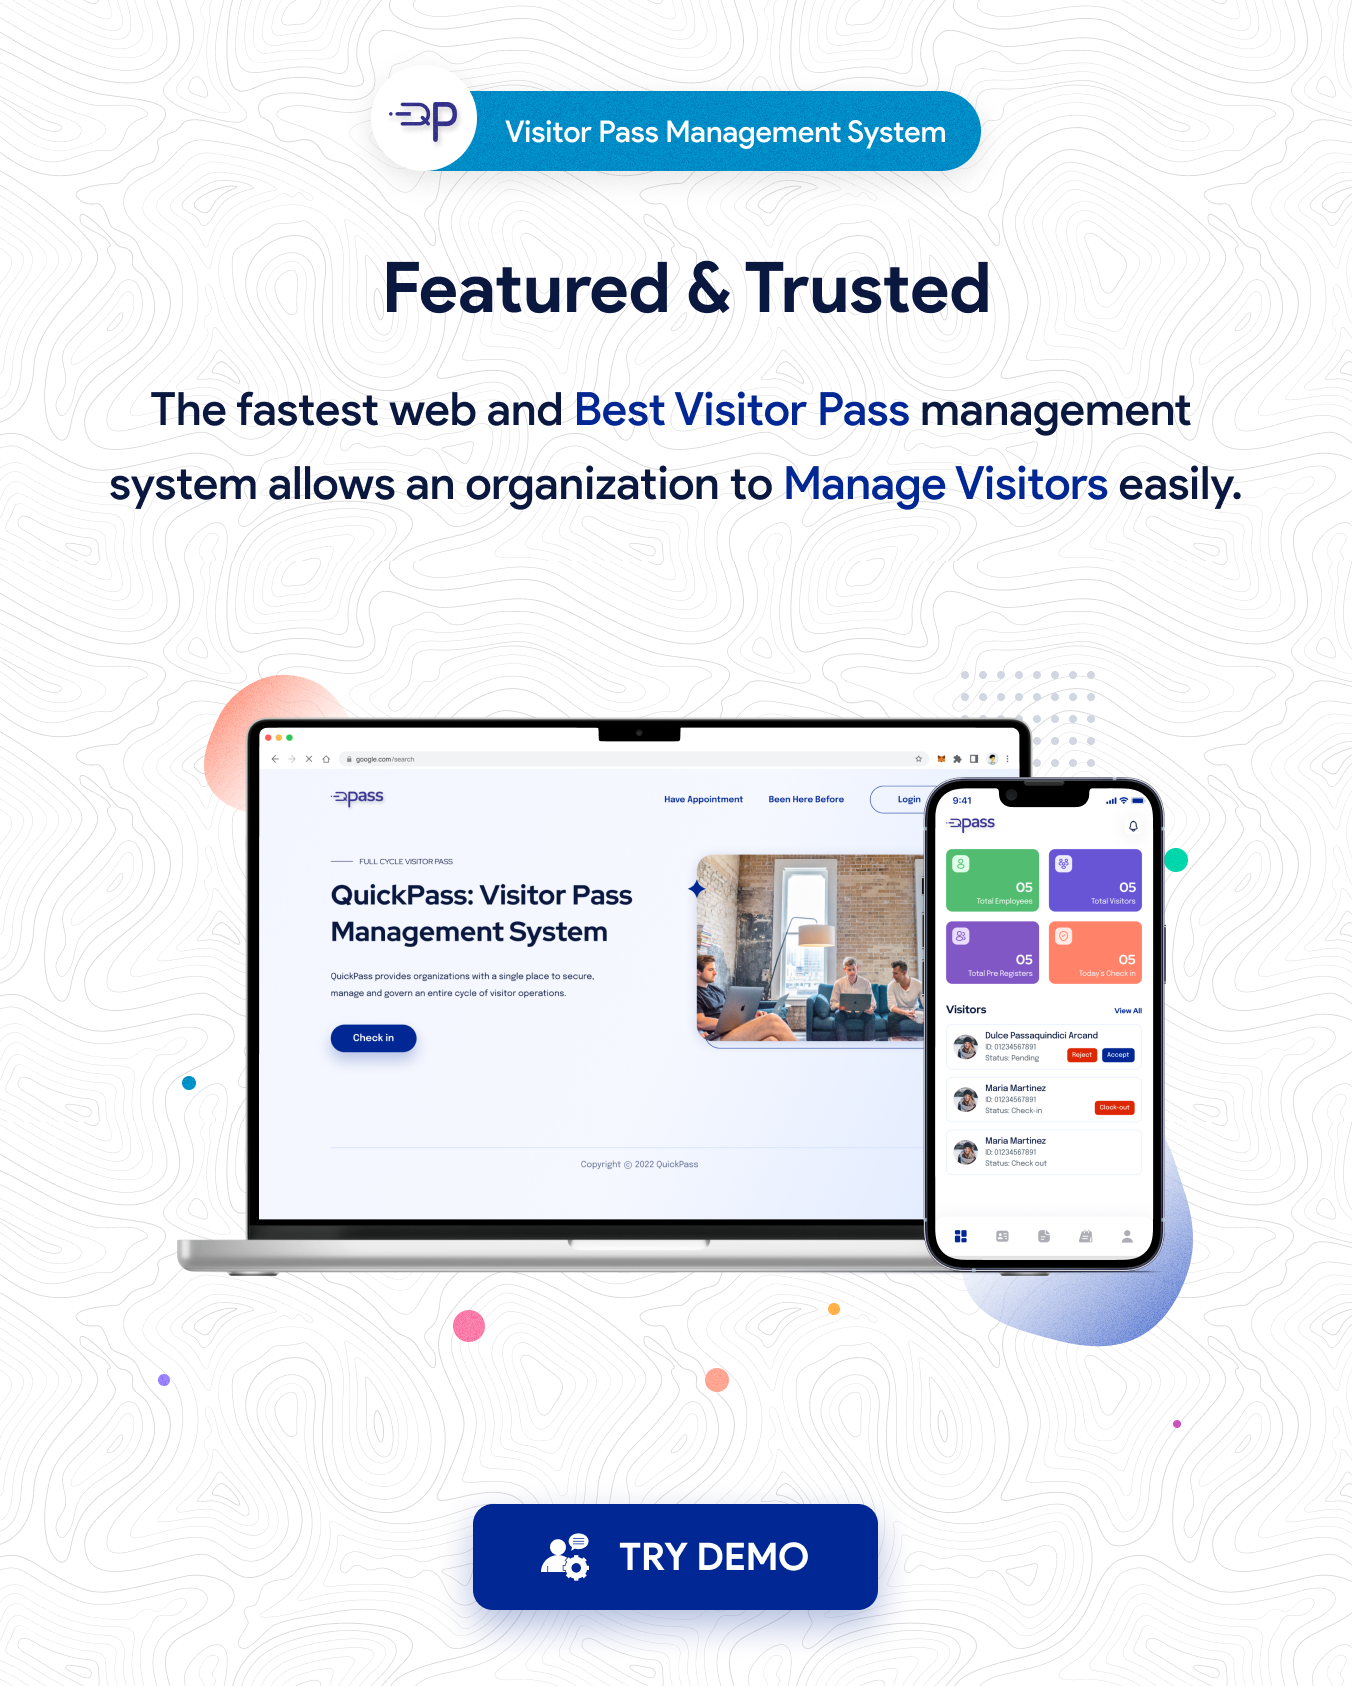 Visitor Pass Management System featured trusted